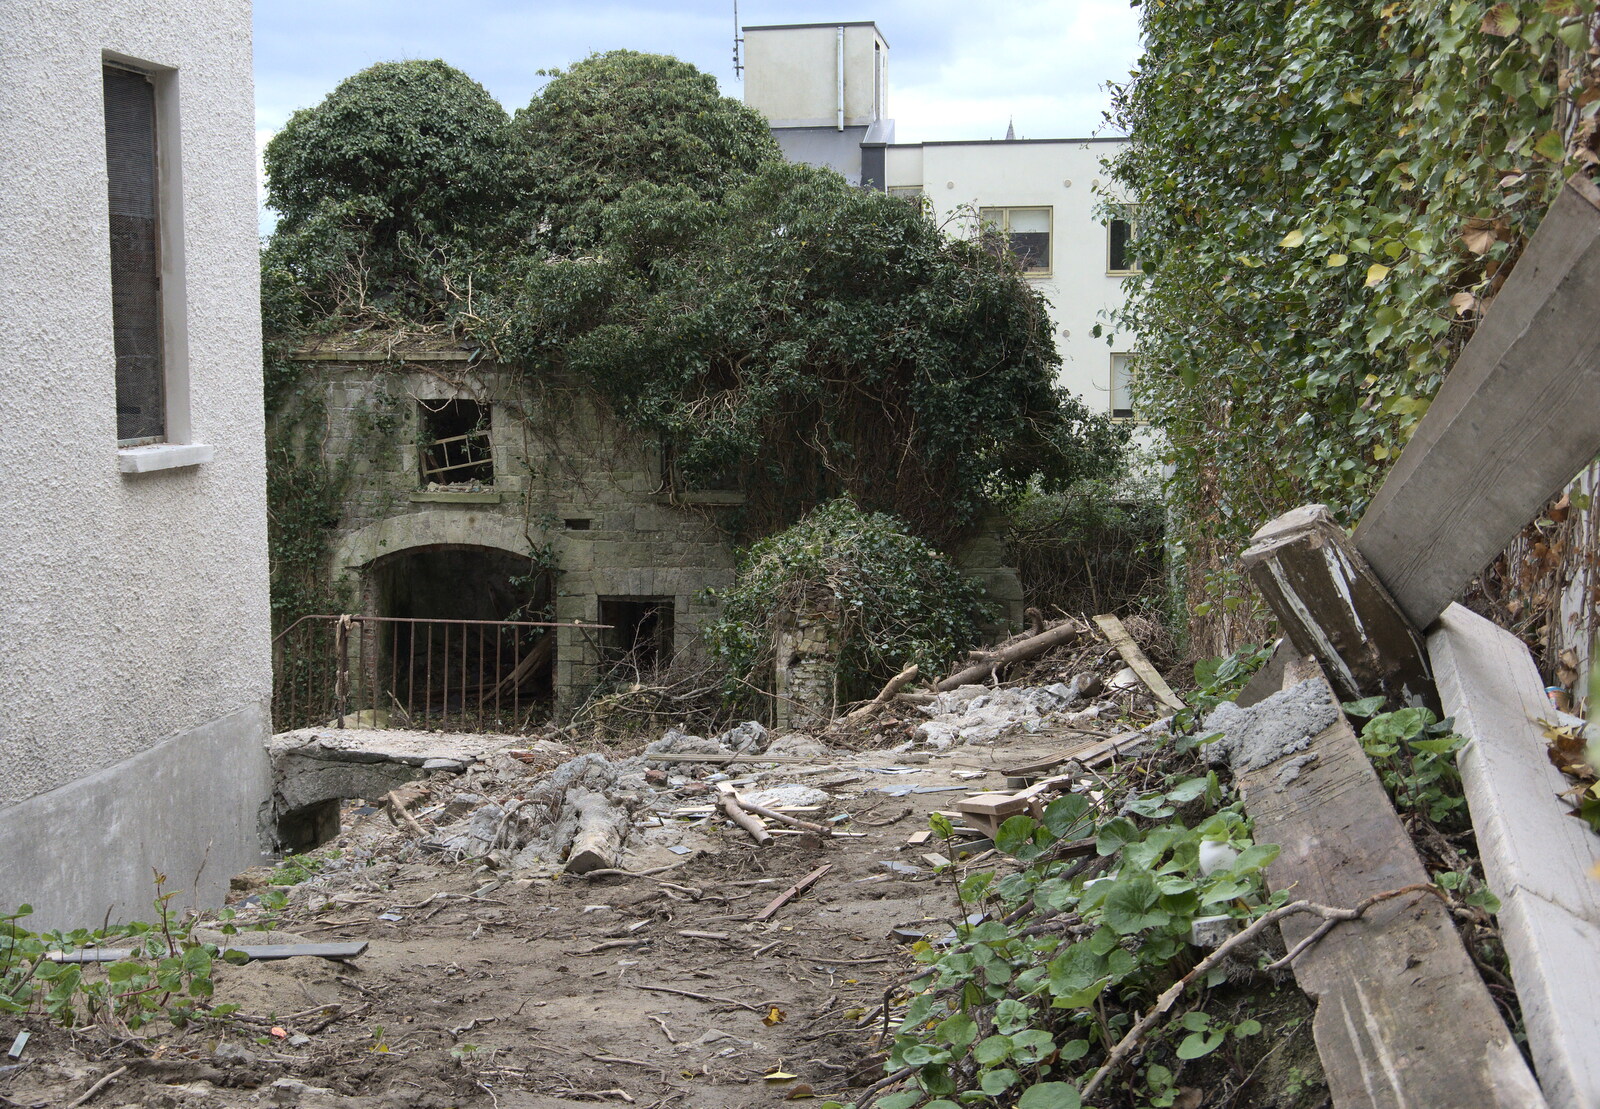 Another derelict building is taken over by trees from Manorhamilton and Bundoran, Leitrim and Donegal, Ireland - 16th April 2022